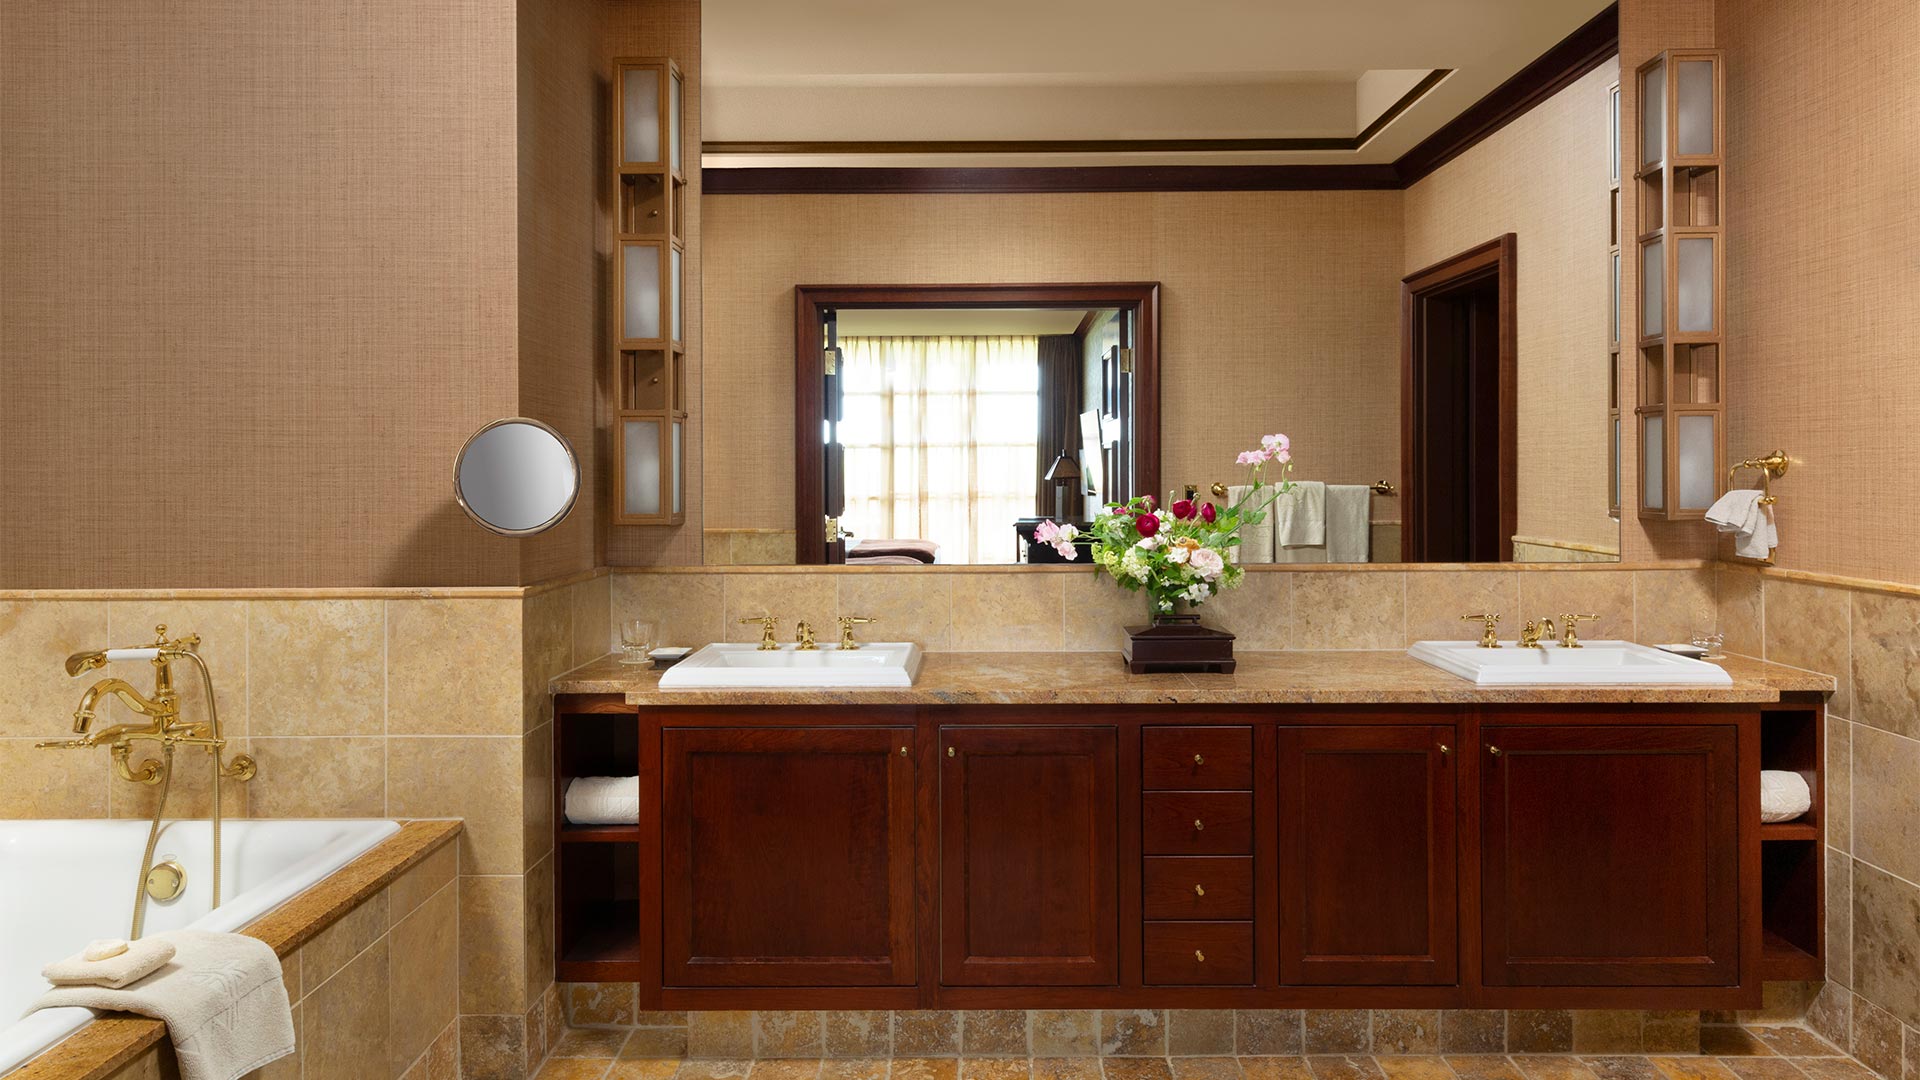 an interior shot of the bathroom. There is a large counter with a sink and shelving. There is a vase full of colorful flowers on the counter top. To the left of the sink is a white whirlpool bathtub with gold hardware.